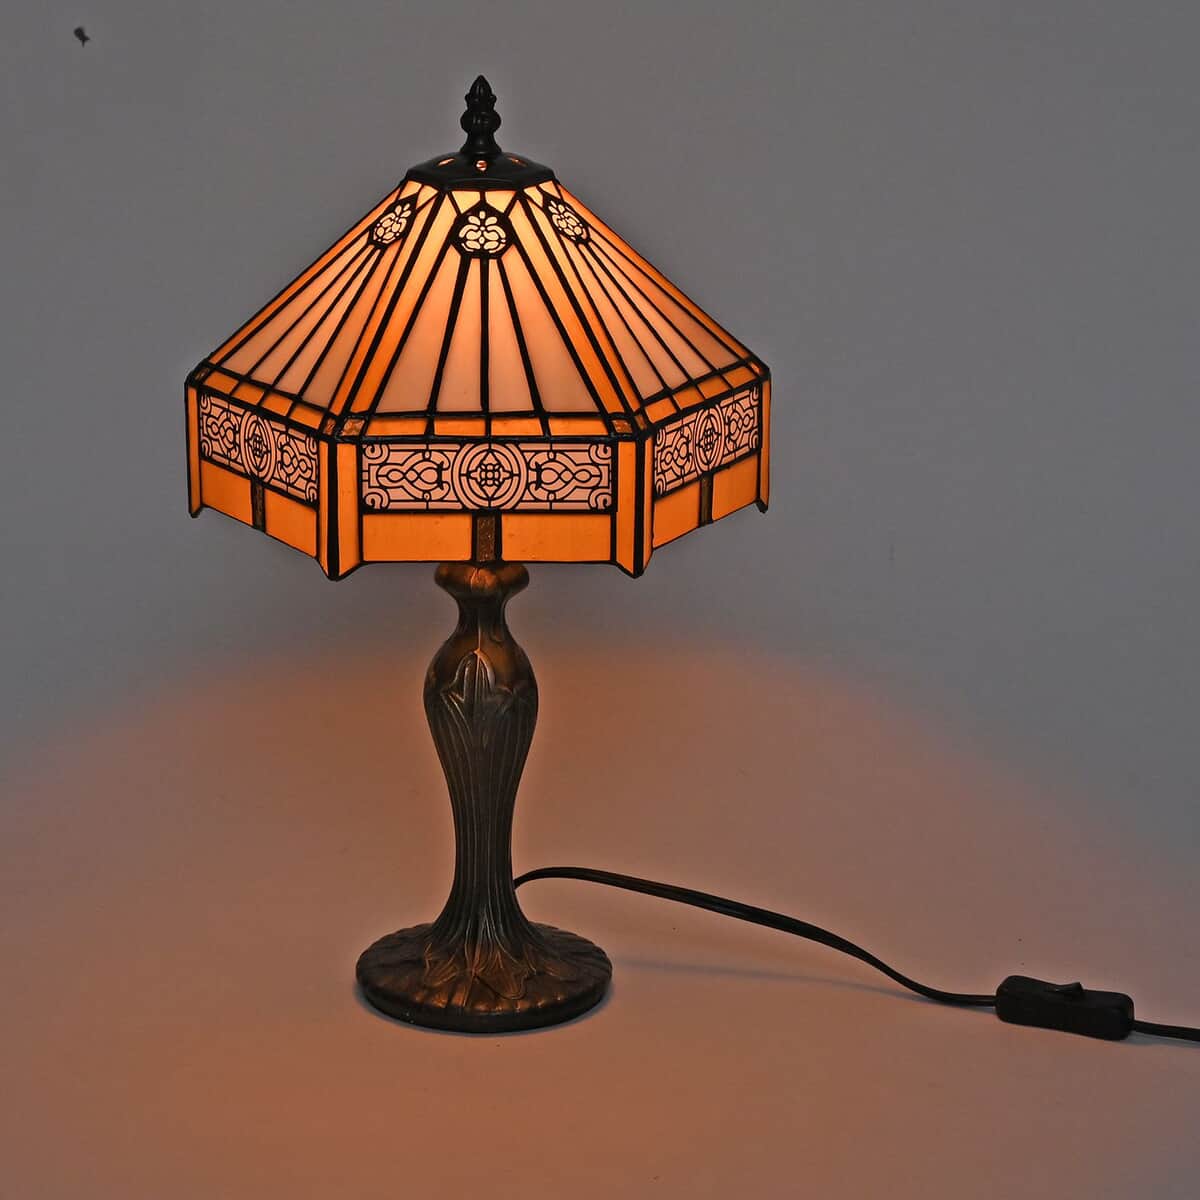 6-Sided Classic Filigree Pattern 10 Inch Tiffany Inspired Table Lamp (E26 Bulb Not Included) image number 1